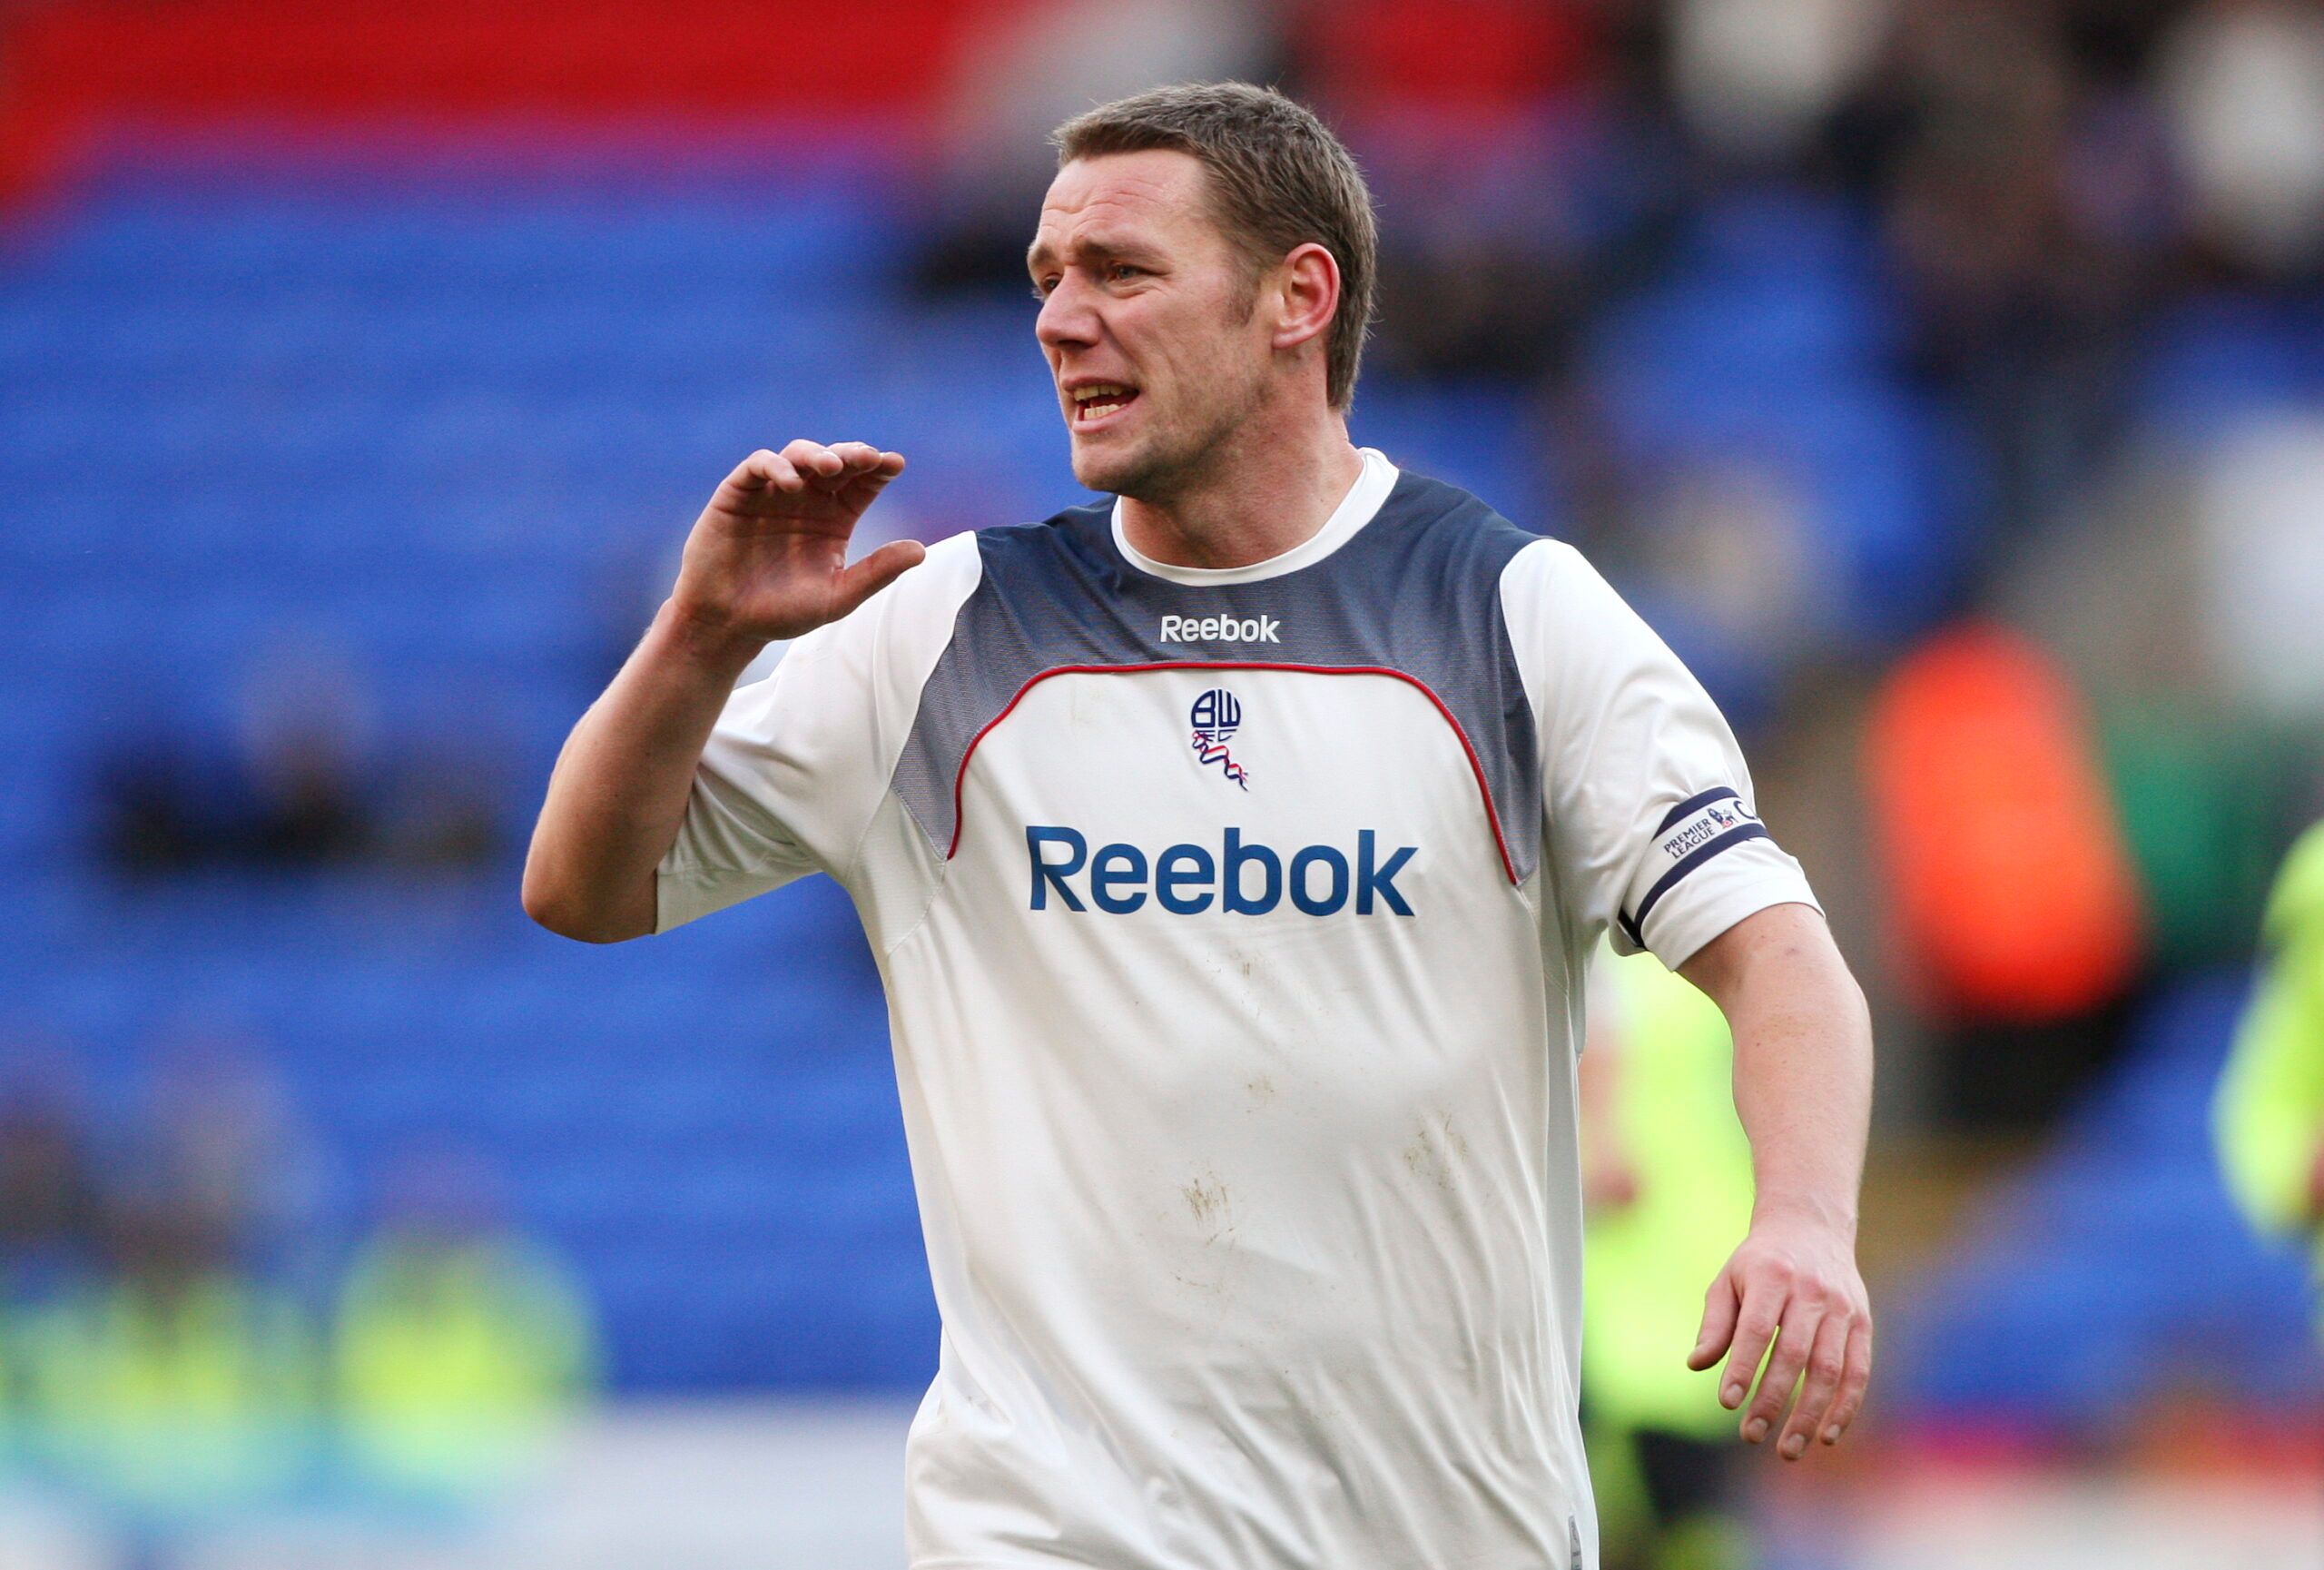 Football - Stock - 08/09 - 28/12/08 
Kevin Nolan - Bolton Wanderers 
Mandatory Credit: Action Images / Paul Currie 
NO ONLINE/INTERNET USE WITHOUT A LICENCE FROM THE FOOTBALL DATA CO LTD. FOR LICENCE ENQUIRIES PLEASE TELEPHONE +44 (0) 207 864 9000.